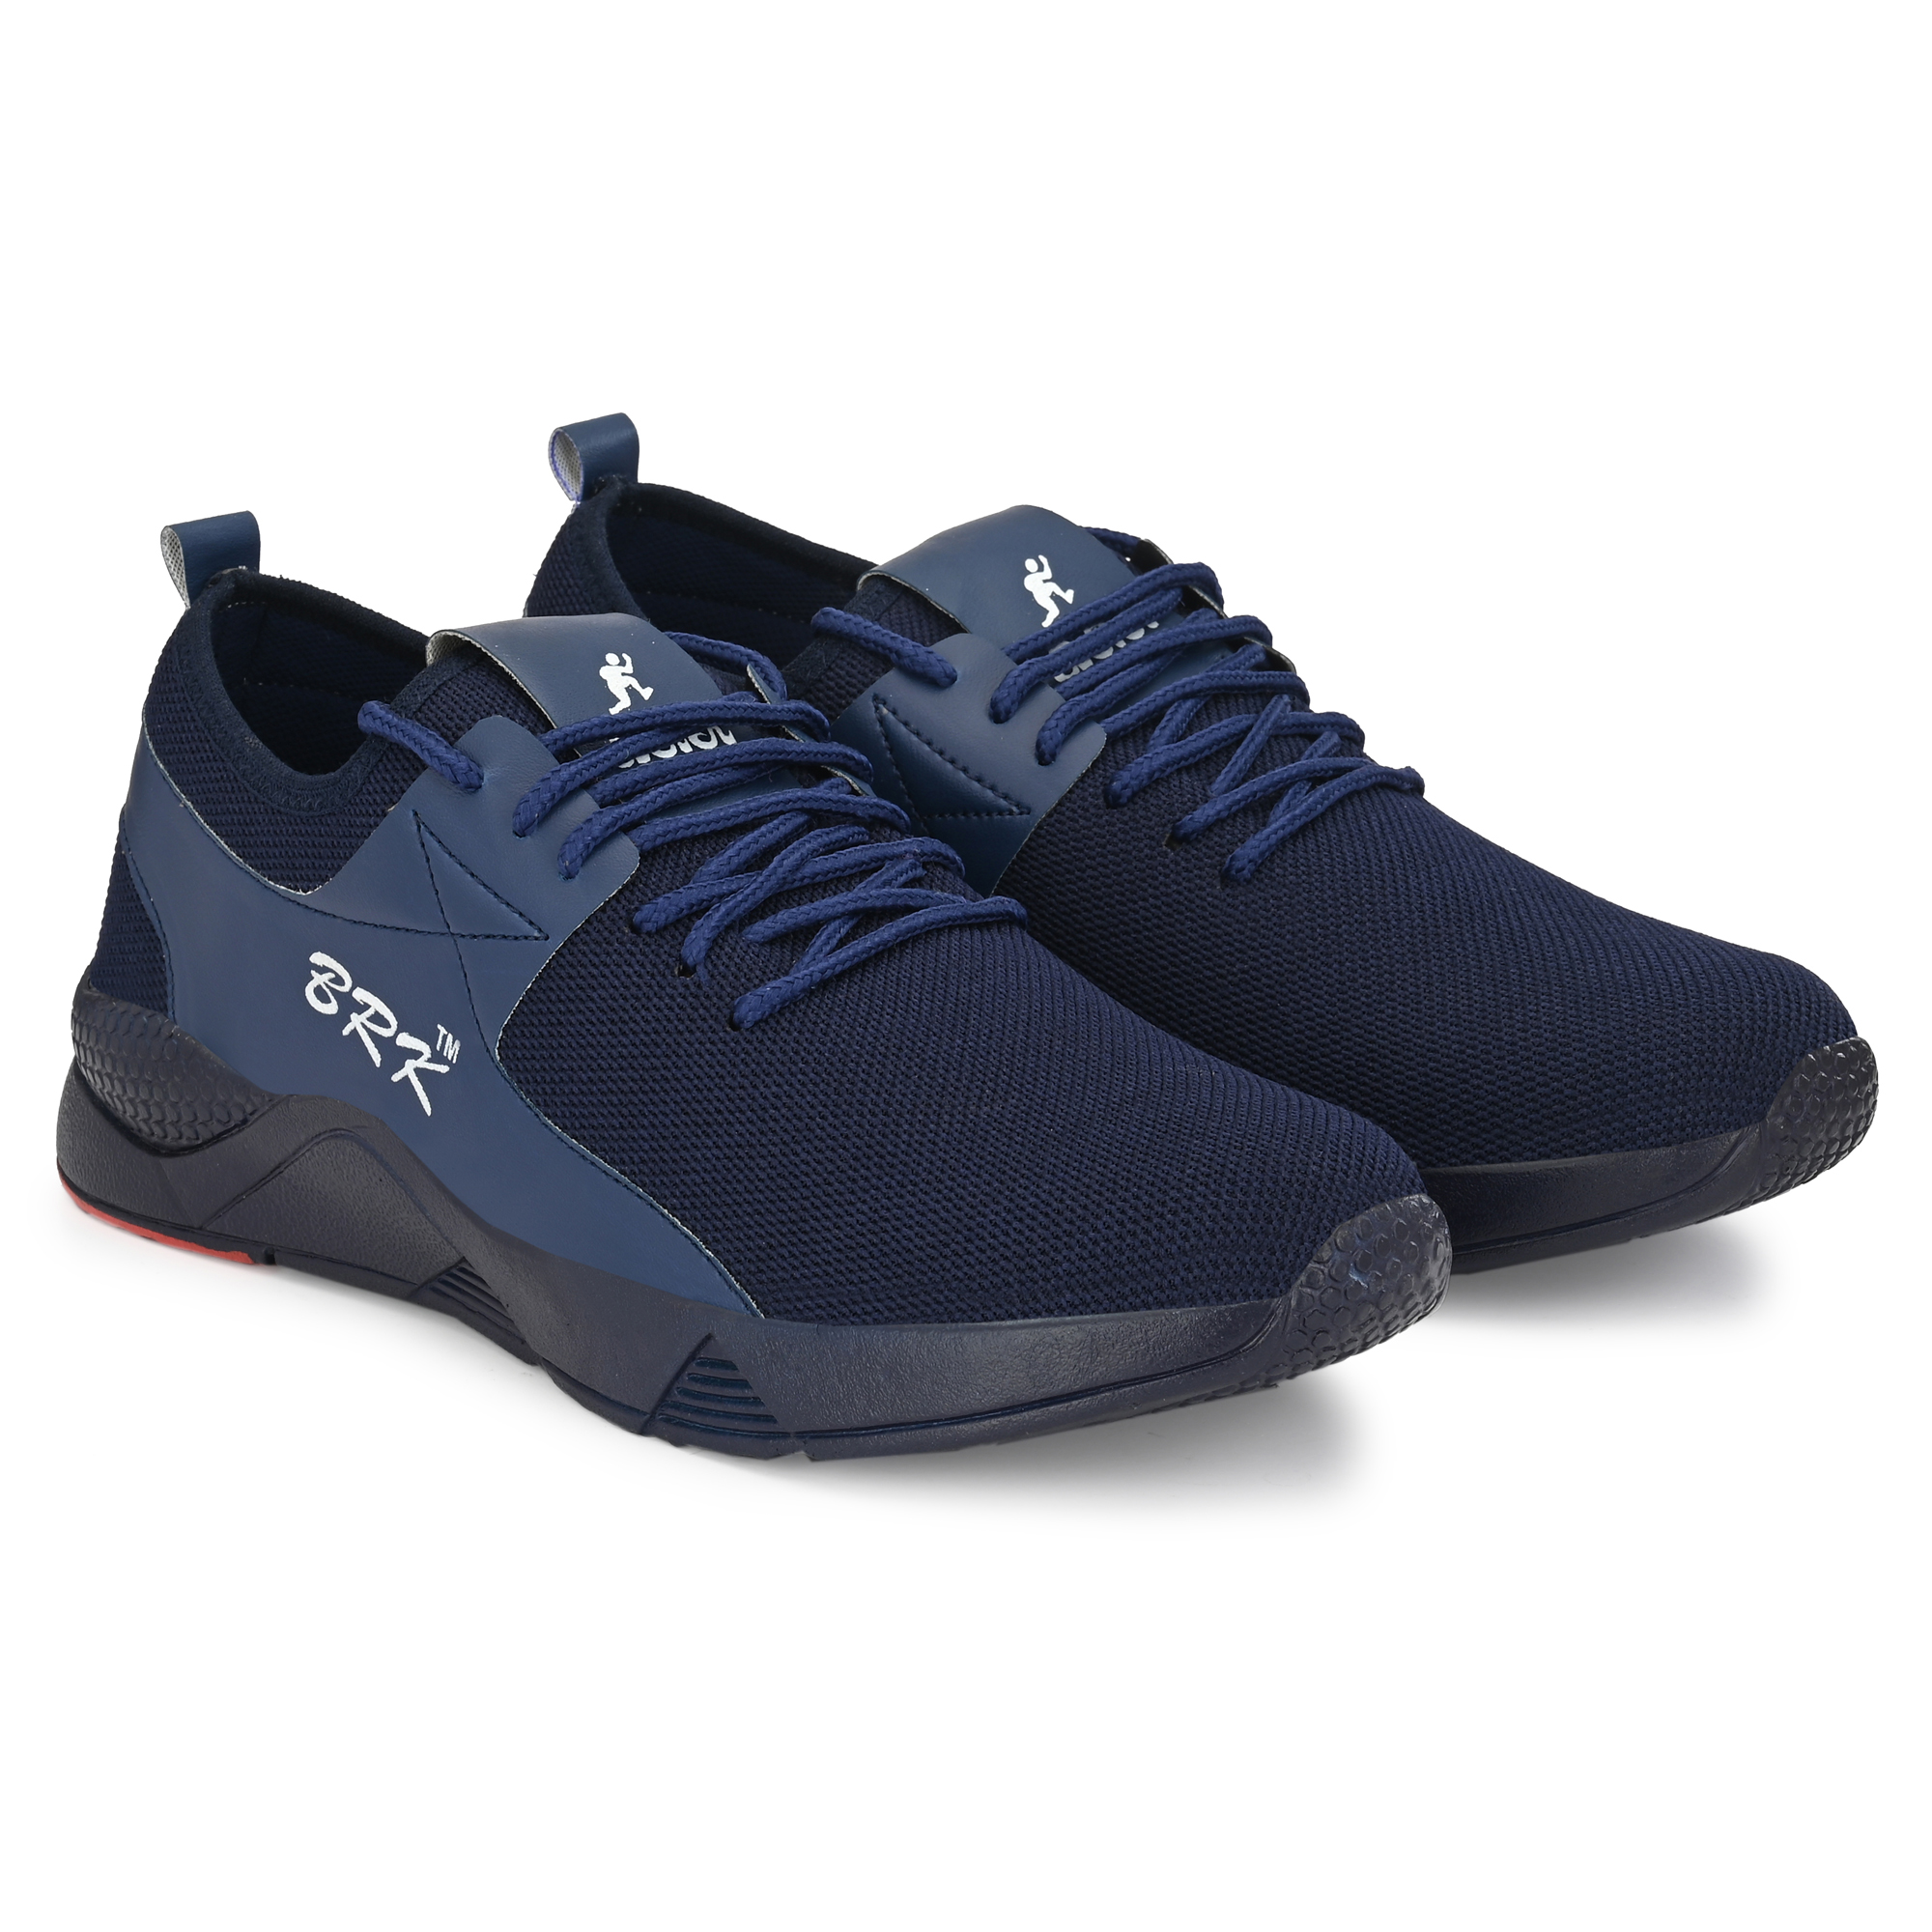 Buy BRK Men's Mesh Sports Shoes Online @ ₹549 from ShopClues